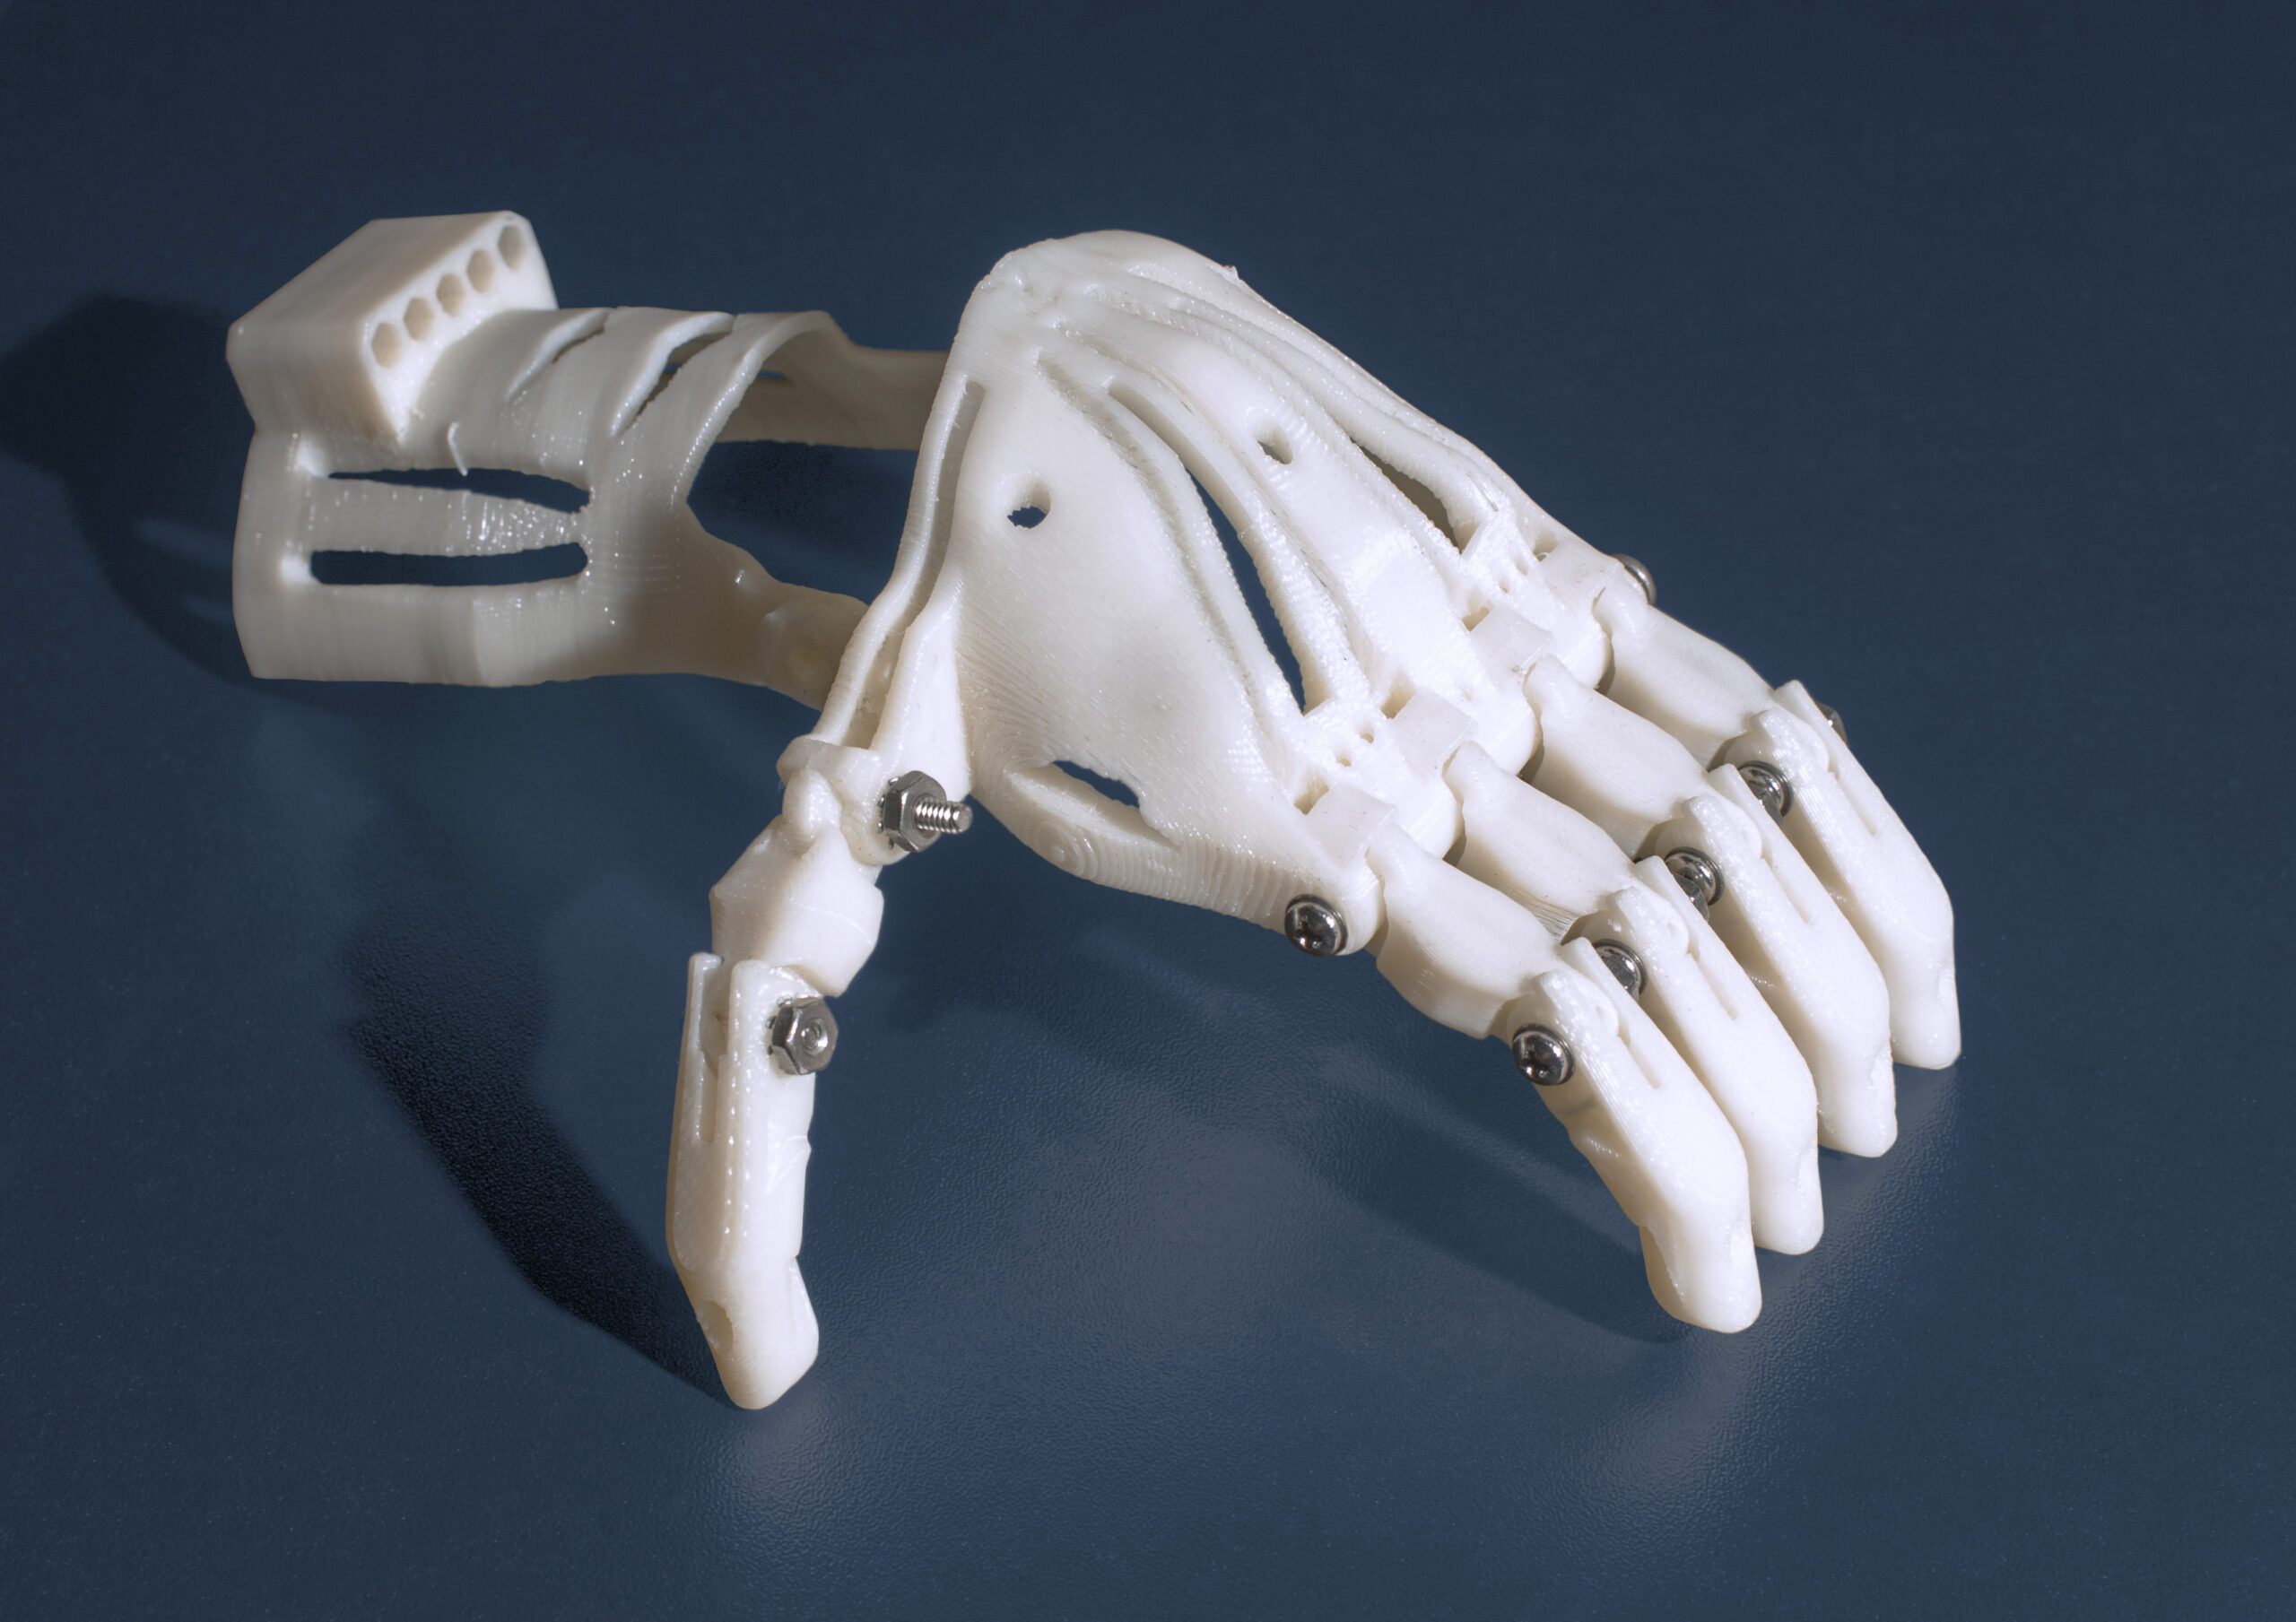 A 3d-printed prosthetic hand